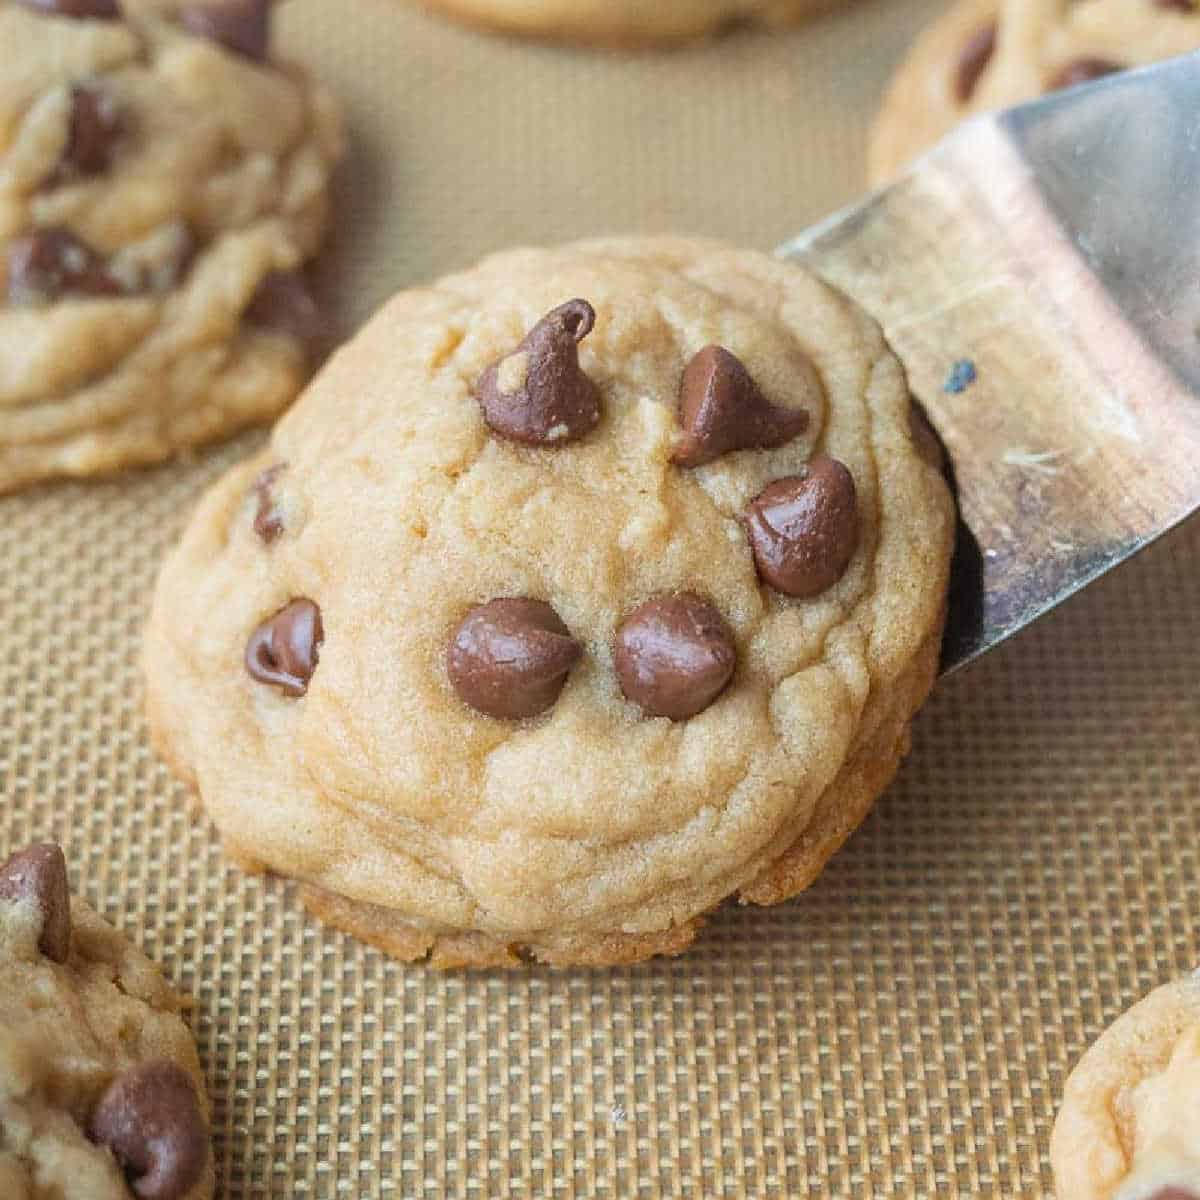 Try these ingredient swaps to bake chocolate chip cookies with